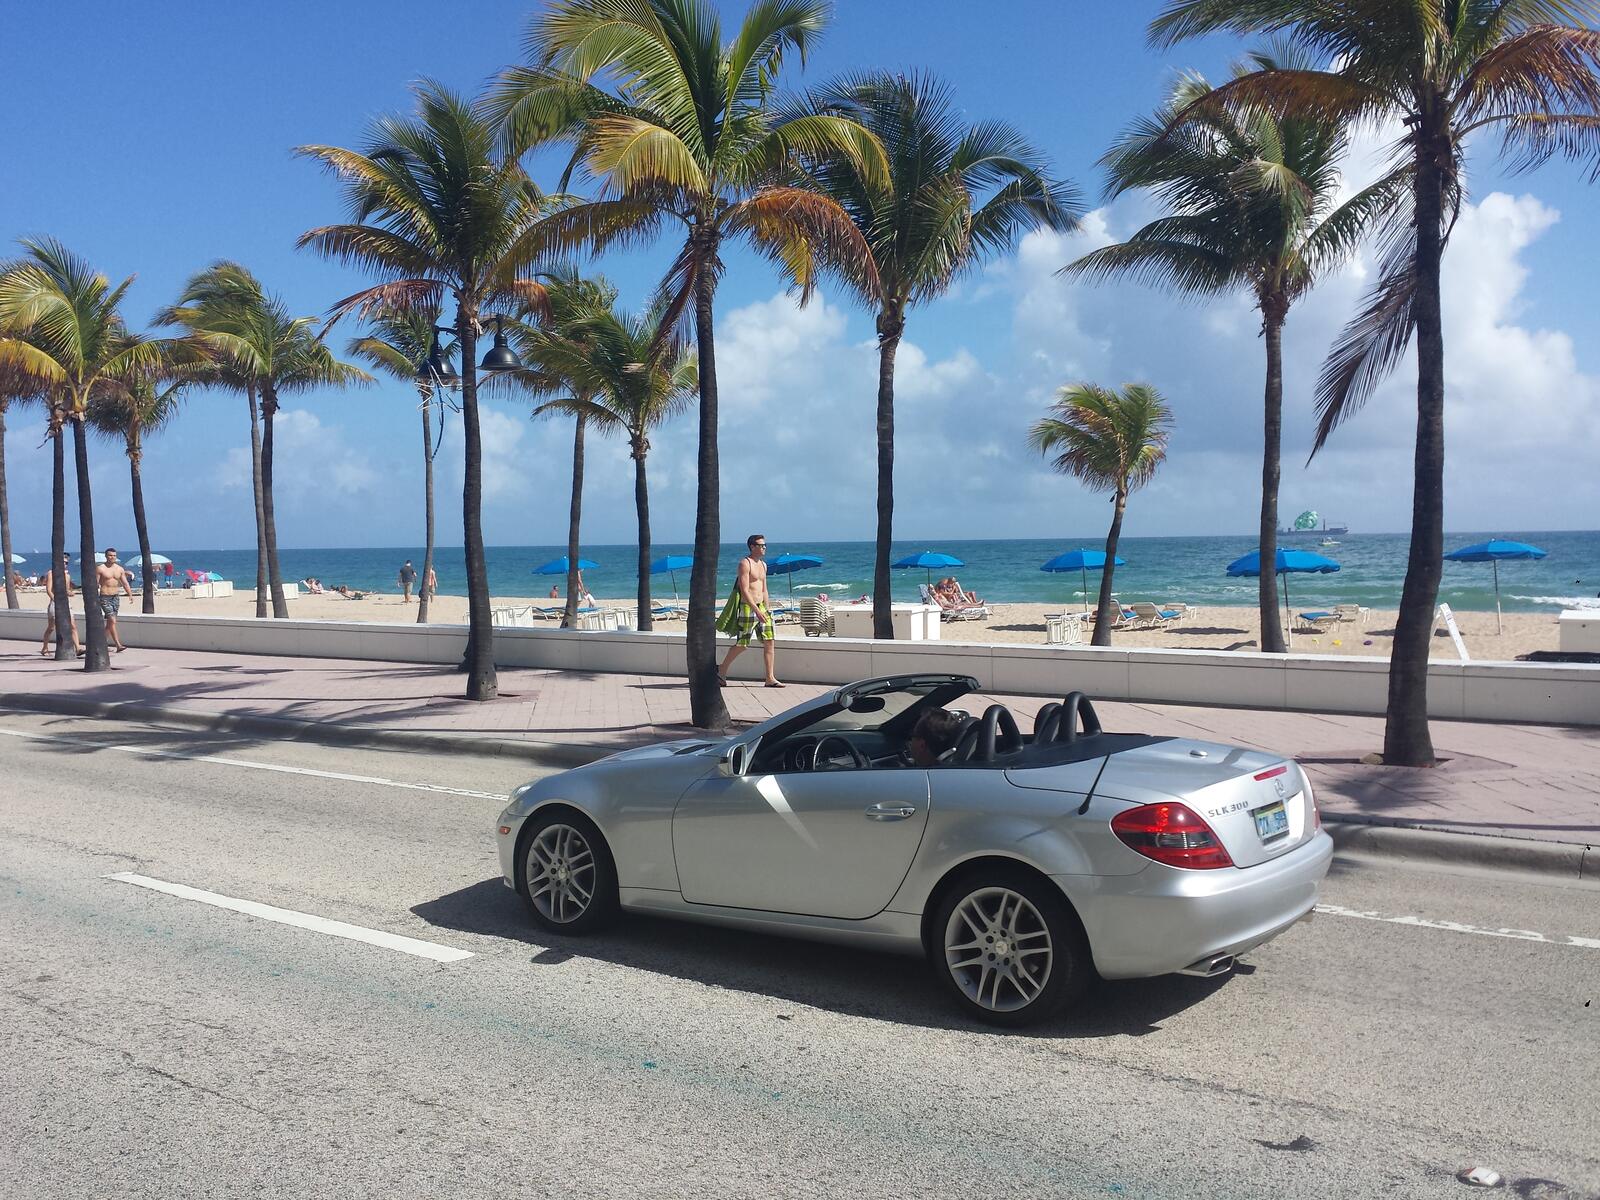 Free photo Mercedes convertible drives next to a beach and palm trees